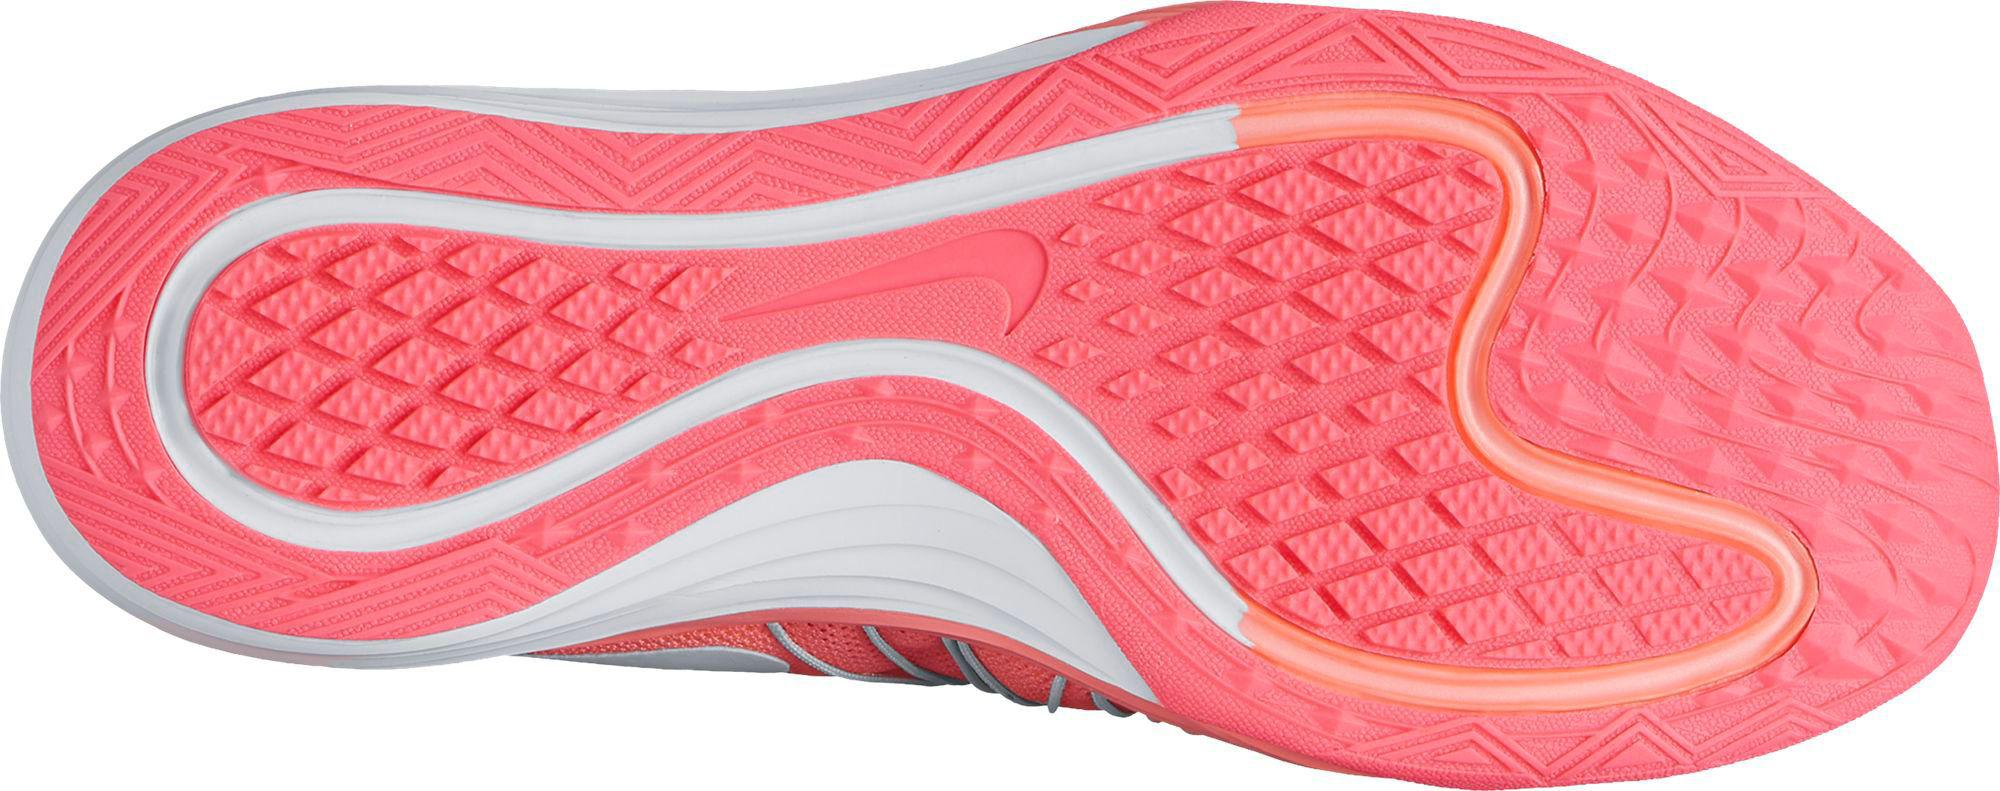 Nike Neoprene Dual Fusion Tr Hit Fade Training Shoes in Pink/Orange (Pink)  | Lyst